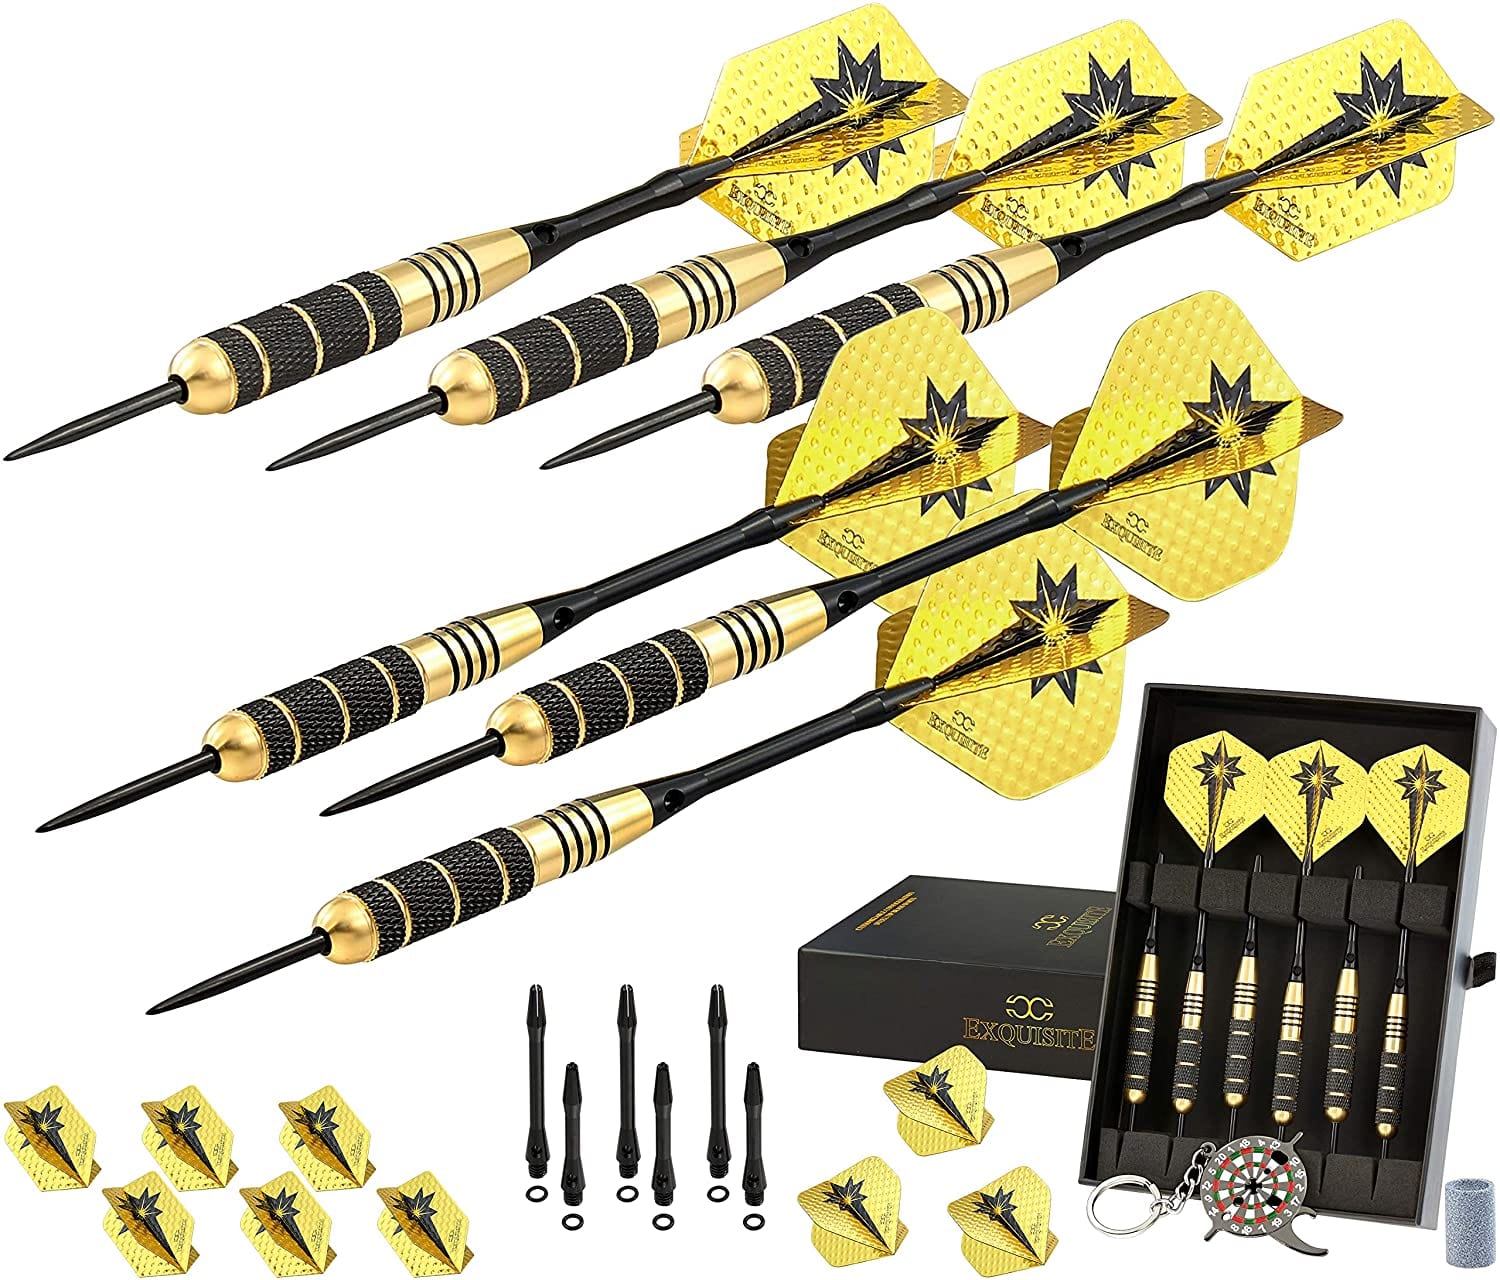 CC-Exquisite Professional Darts Set - 6 Steel Tip Darts Complete with 12 Dart Flights and 12 Aluminum Shafts Customizable Configuration, 12 O-Rings